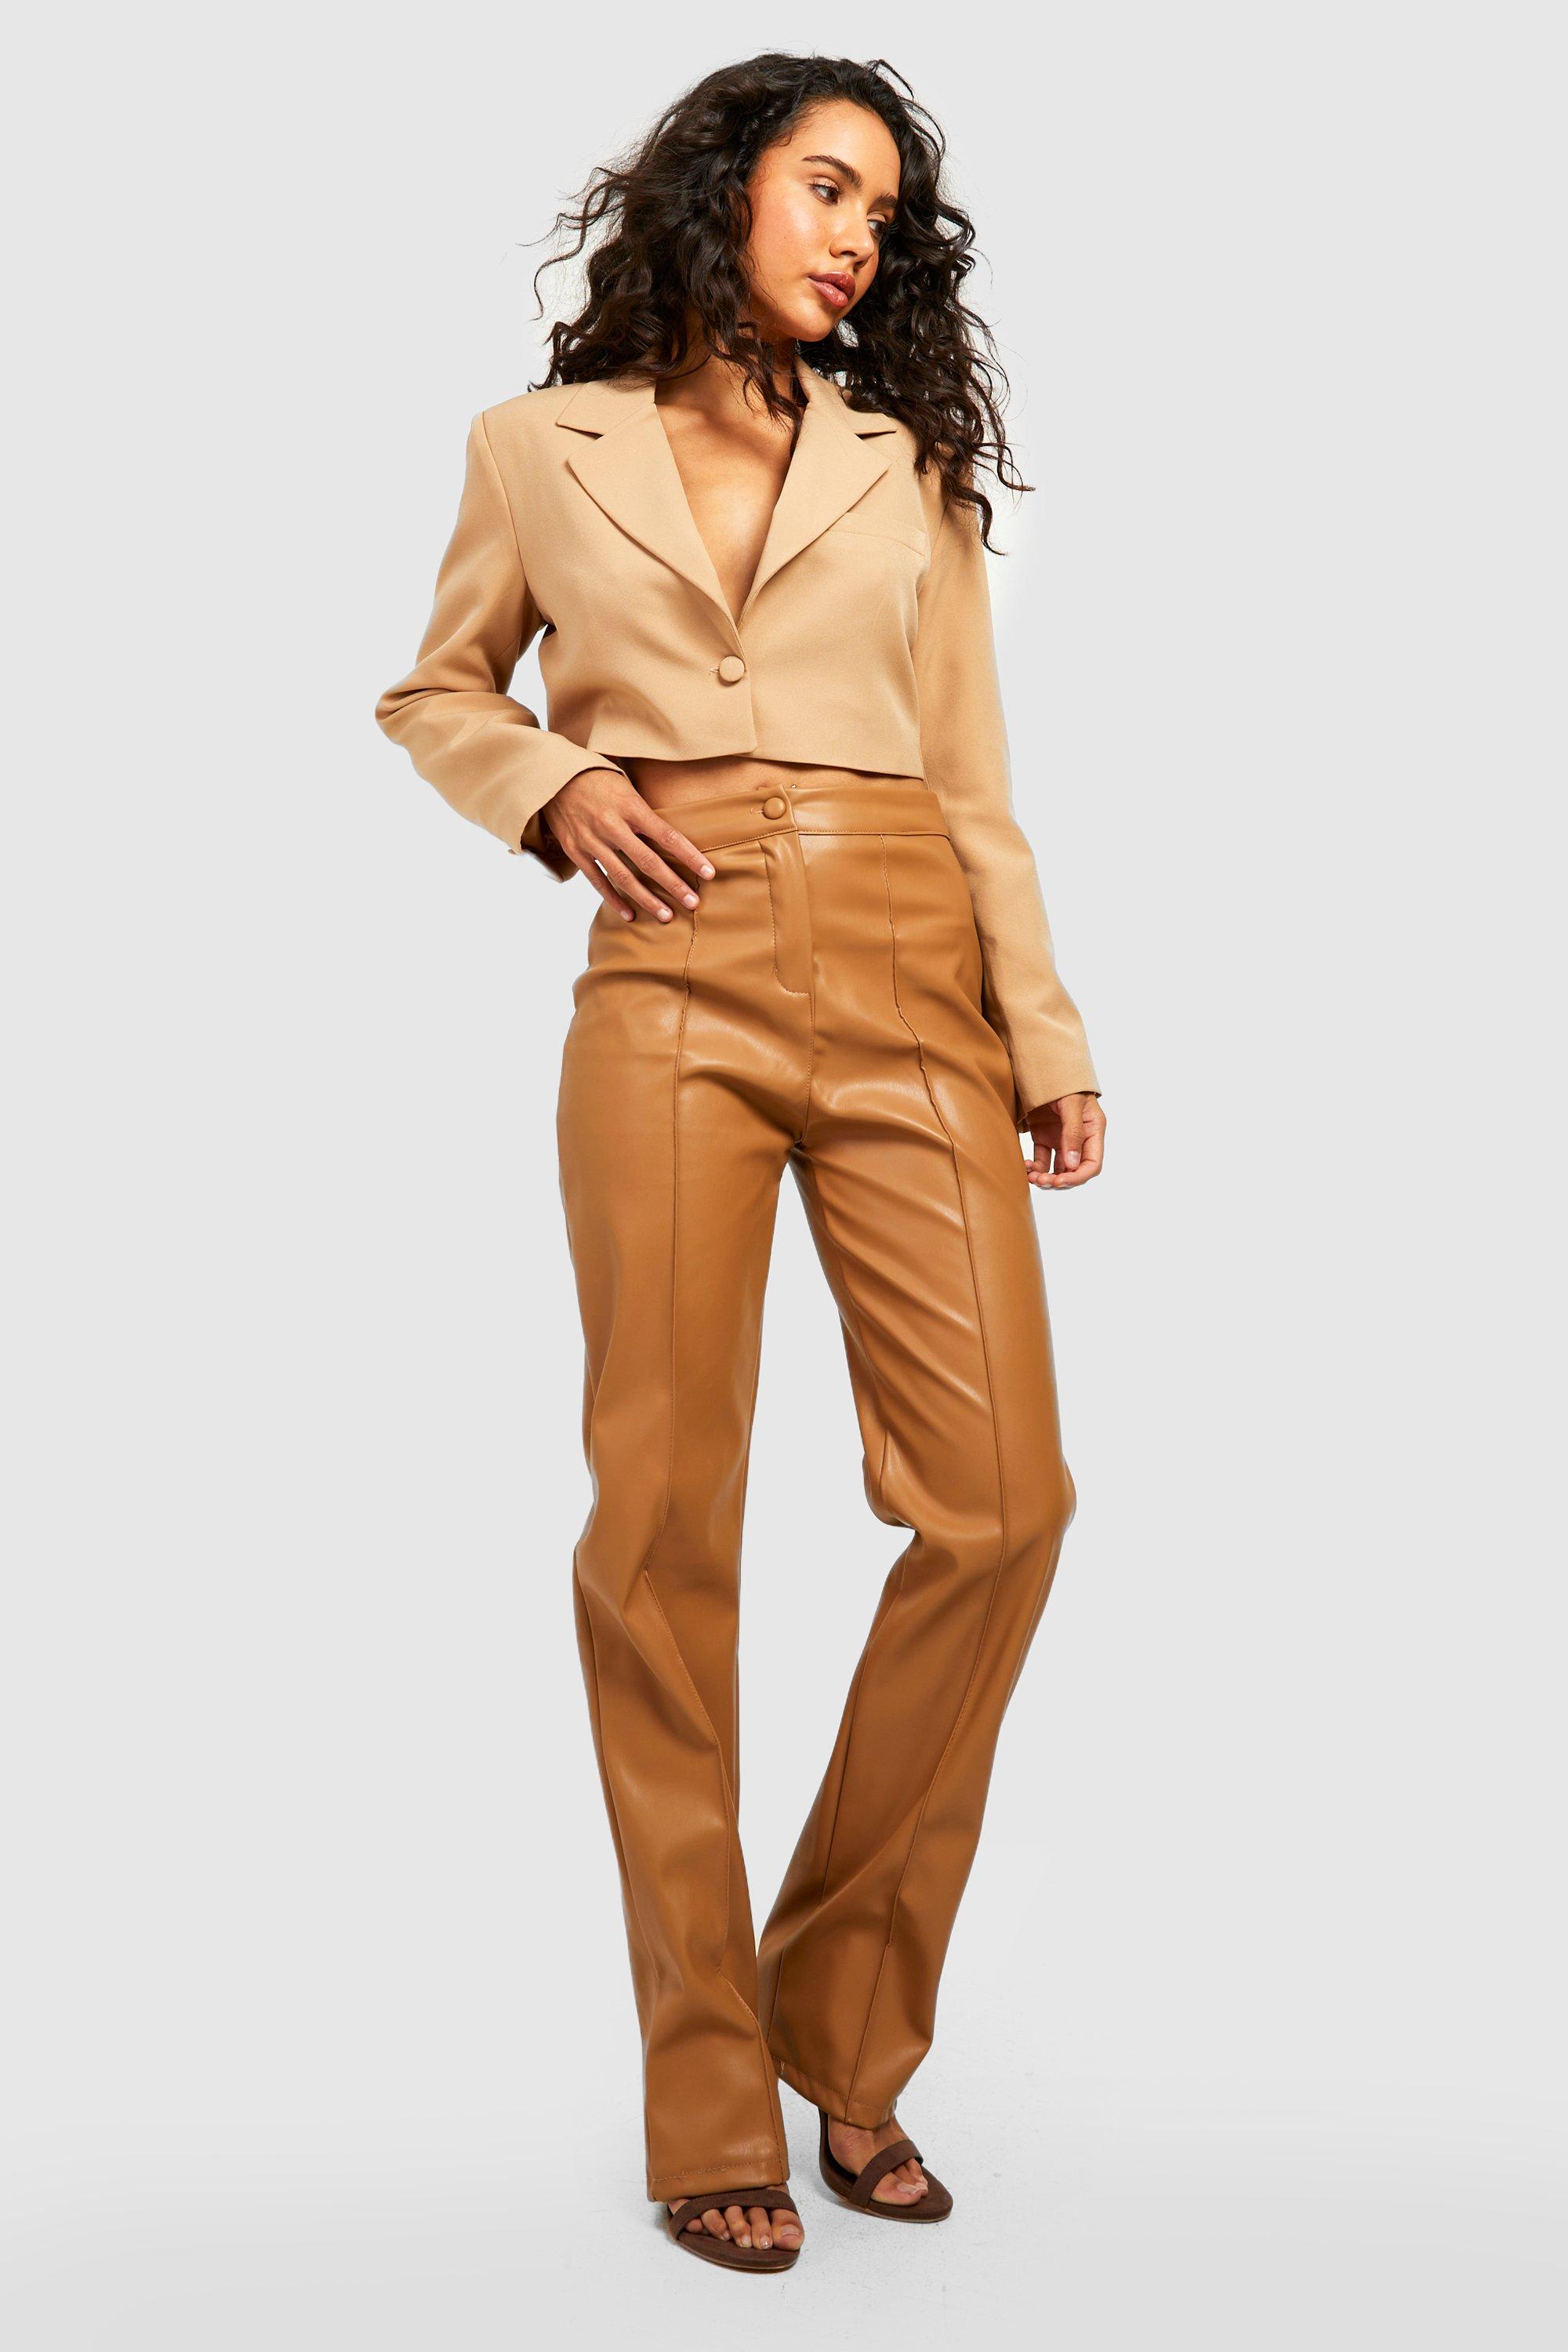 https://media.boohoo.com/i/boohoo/gzz21657_camel_xl_2/female-camel-leather-look-seam-front-tailored-trousers